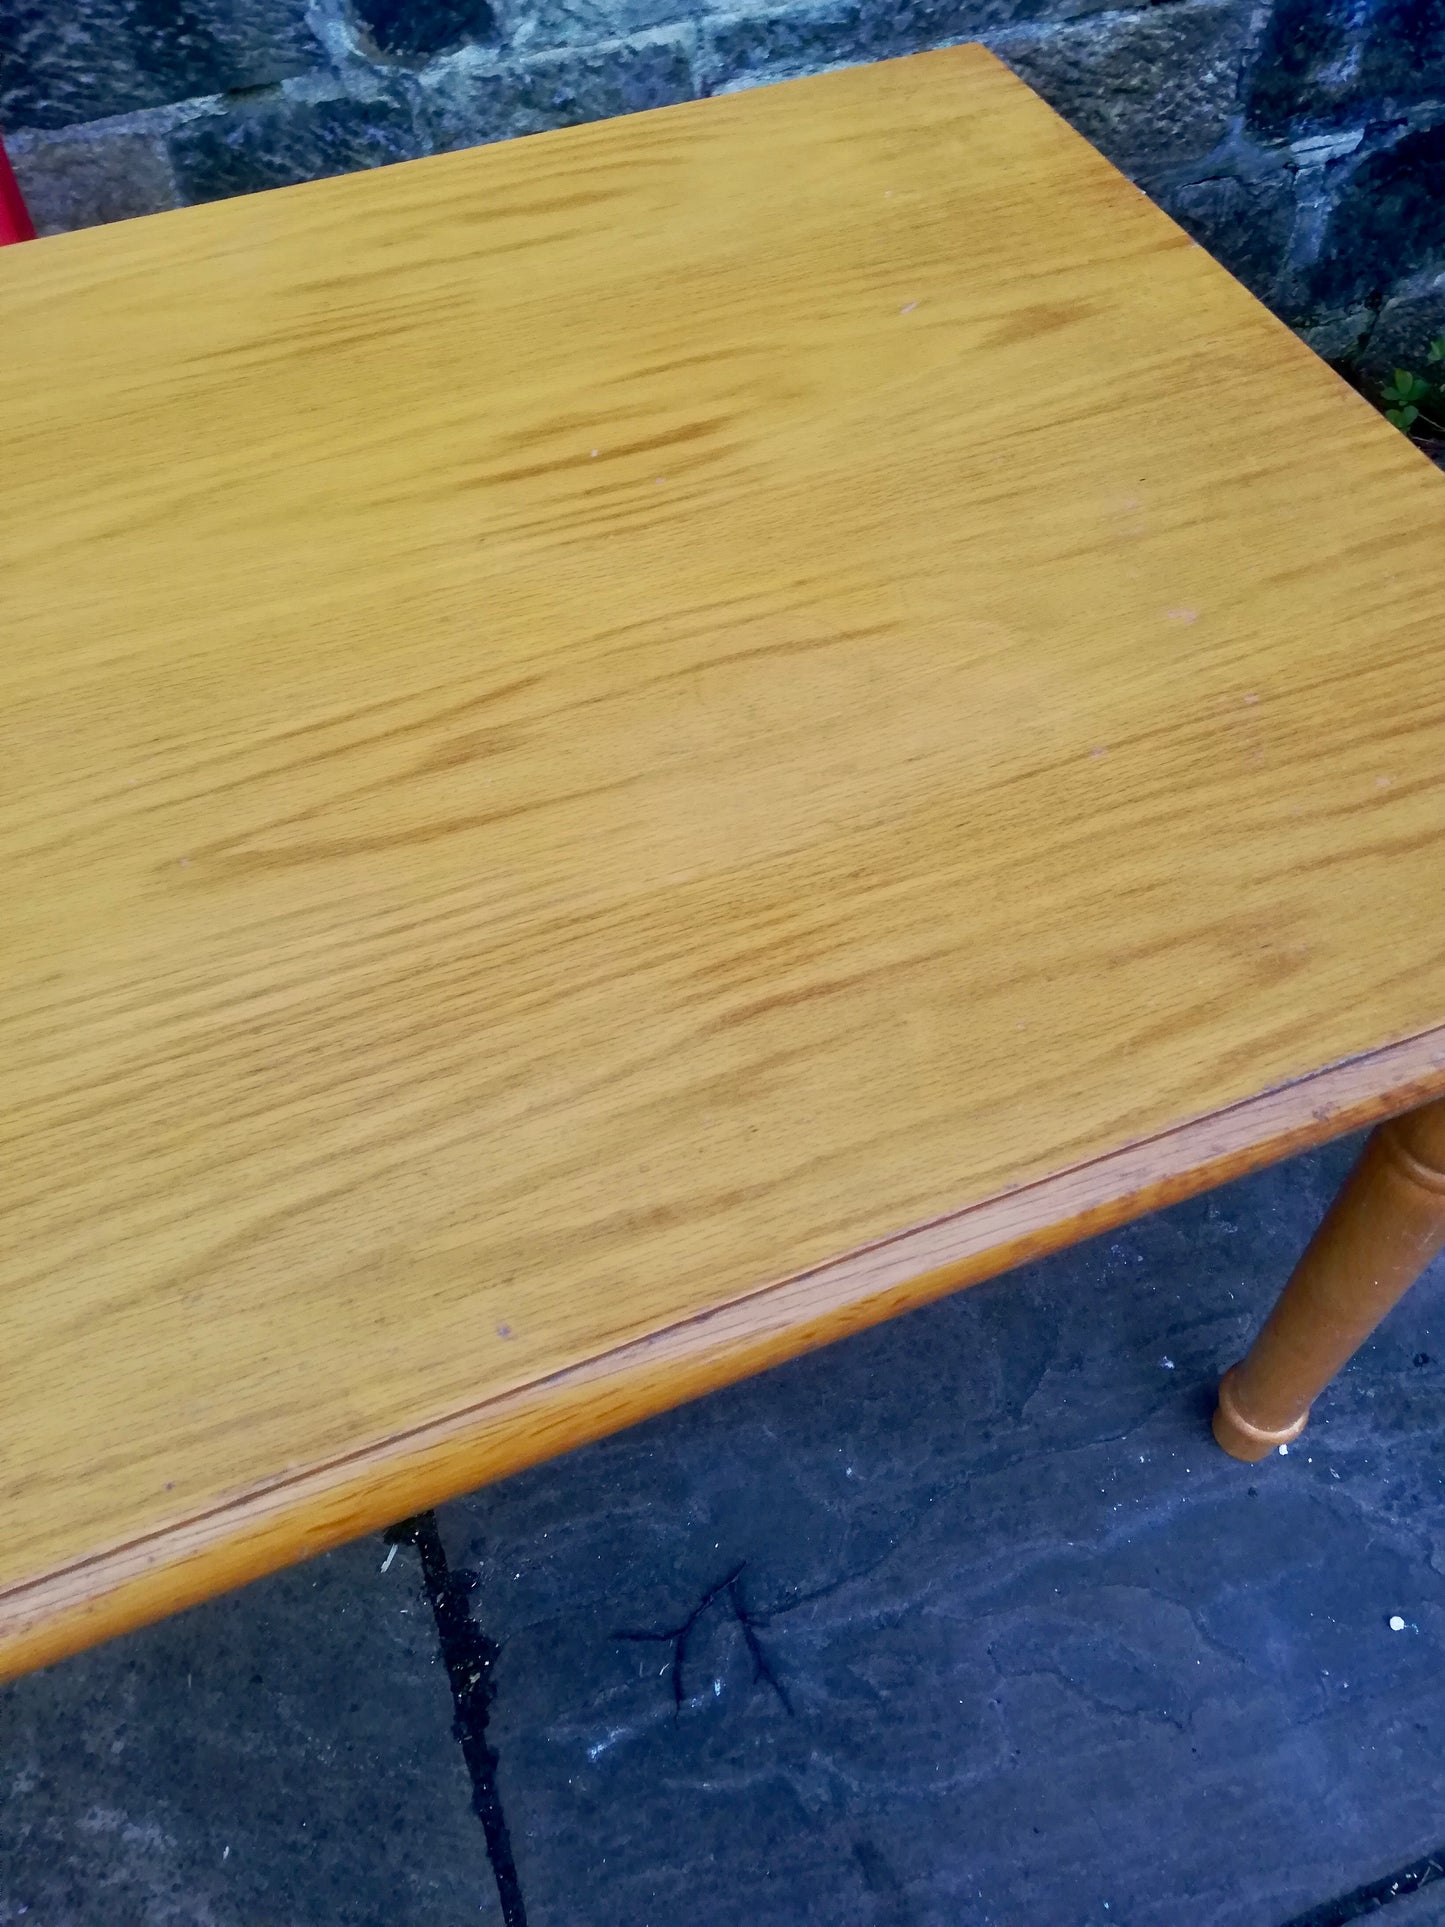 Vintage beech wood dining table  - to have it painted please contact me to discuss what you would like.